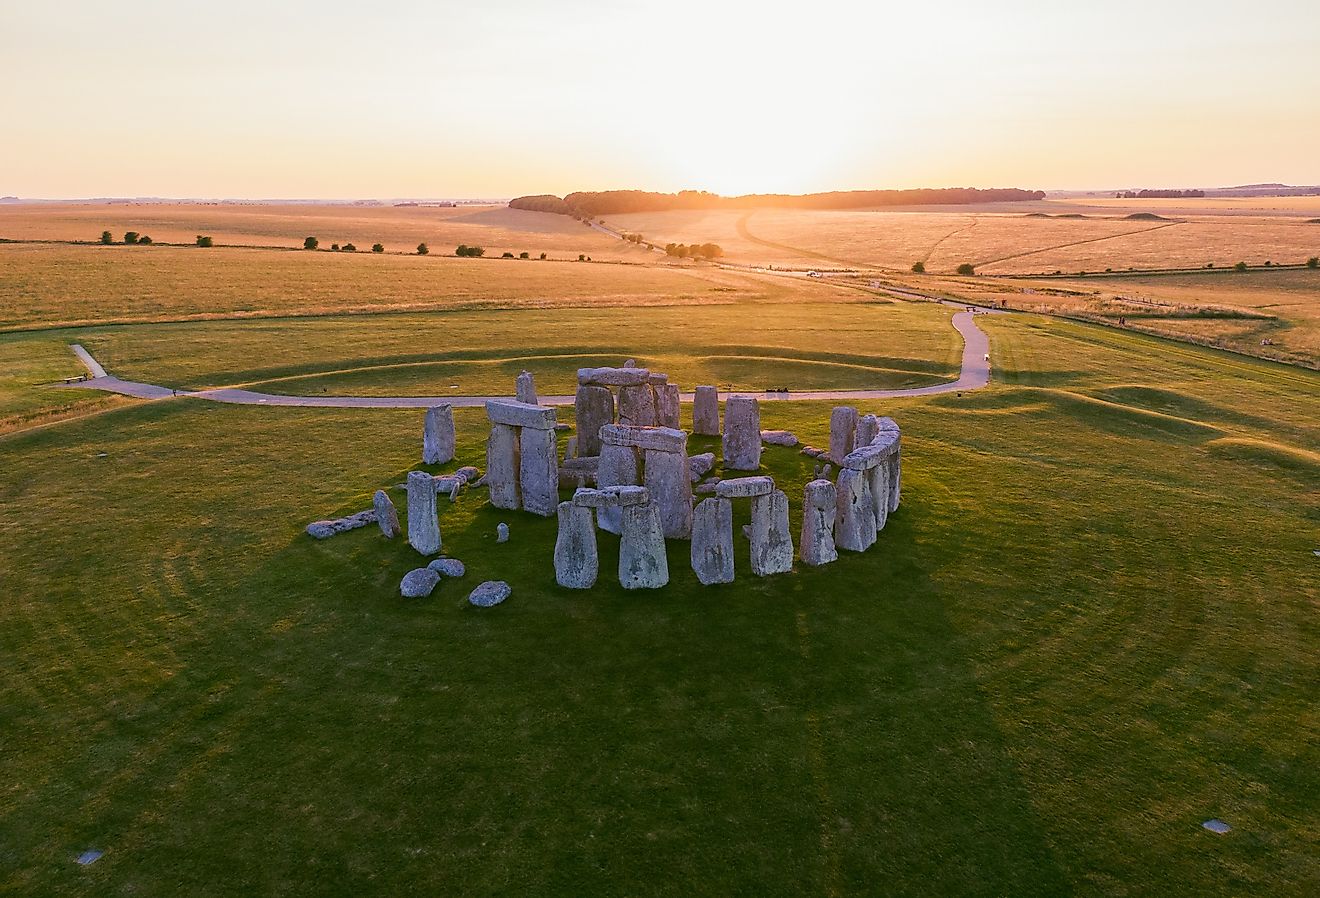 Aerial view of Stonehenge at sunset. Image credit joaoccdj via shutterstock